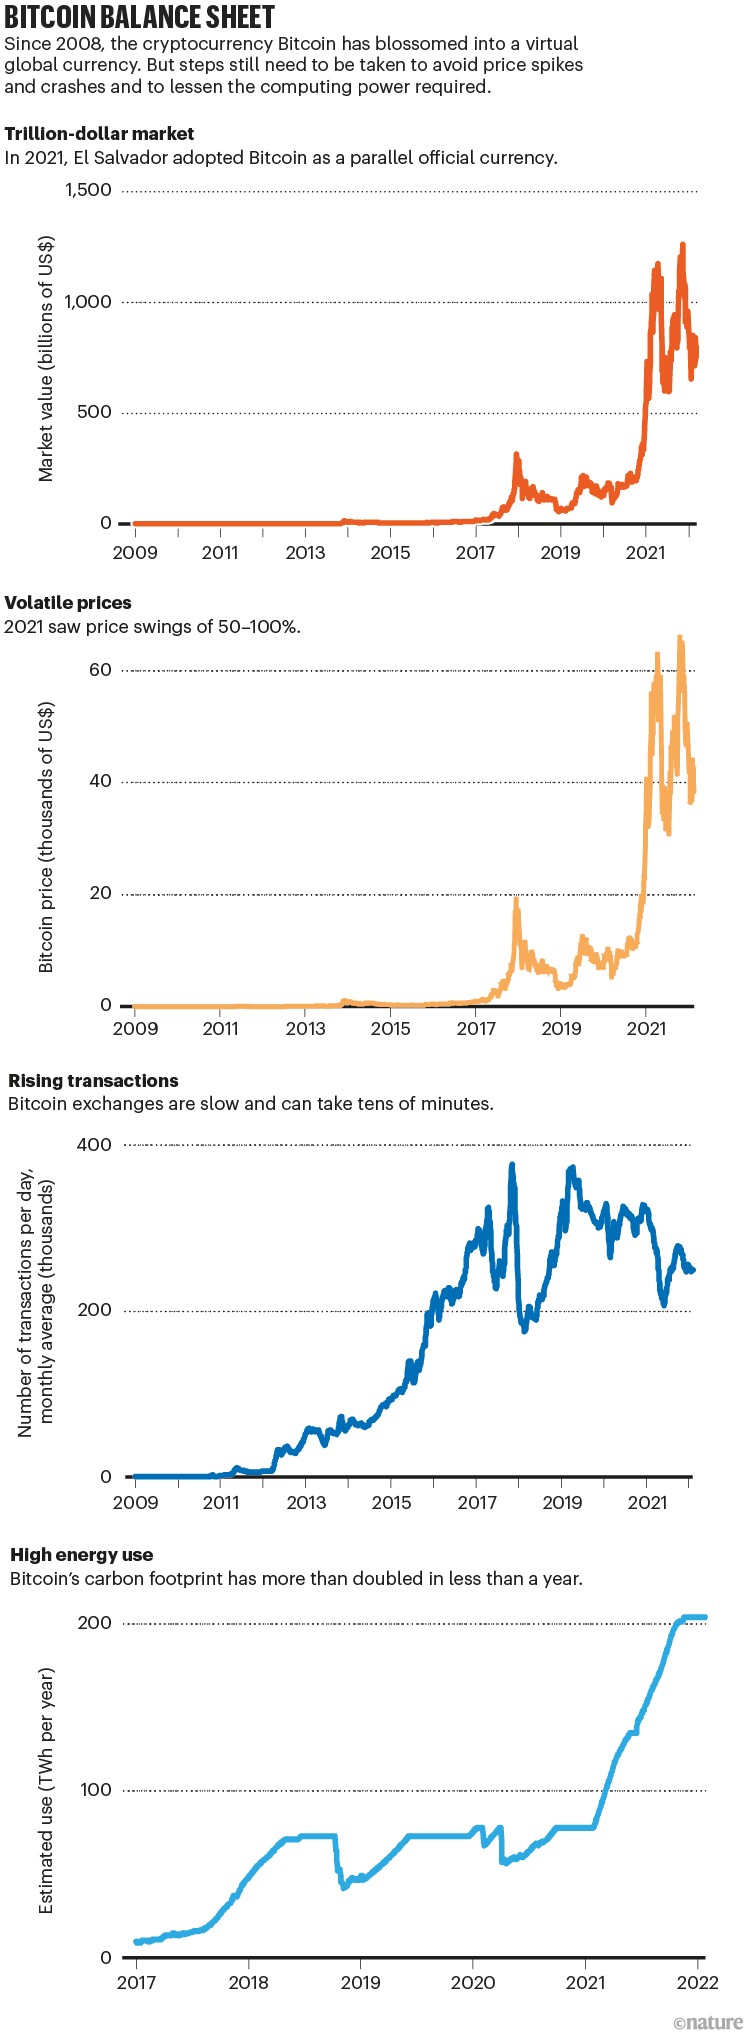 BITCOIN BALANCE SHEET: graphic showing market value, transactions and energy use of Bitcoin